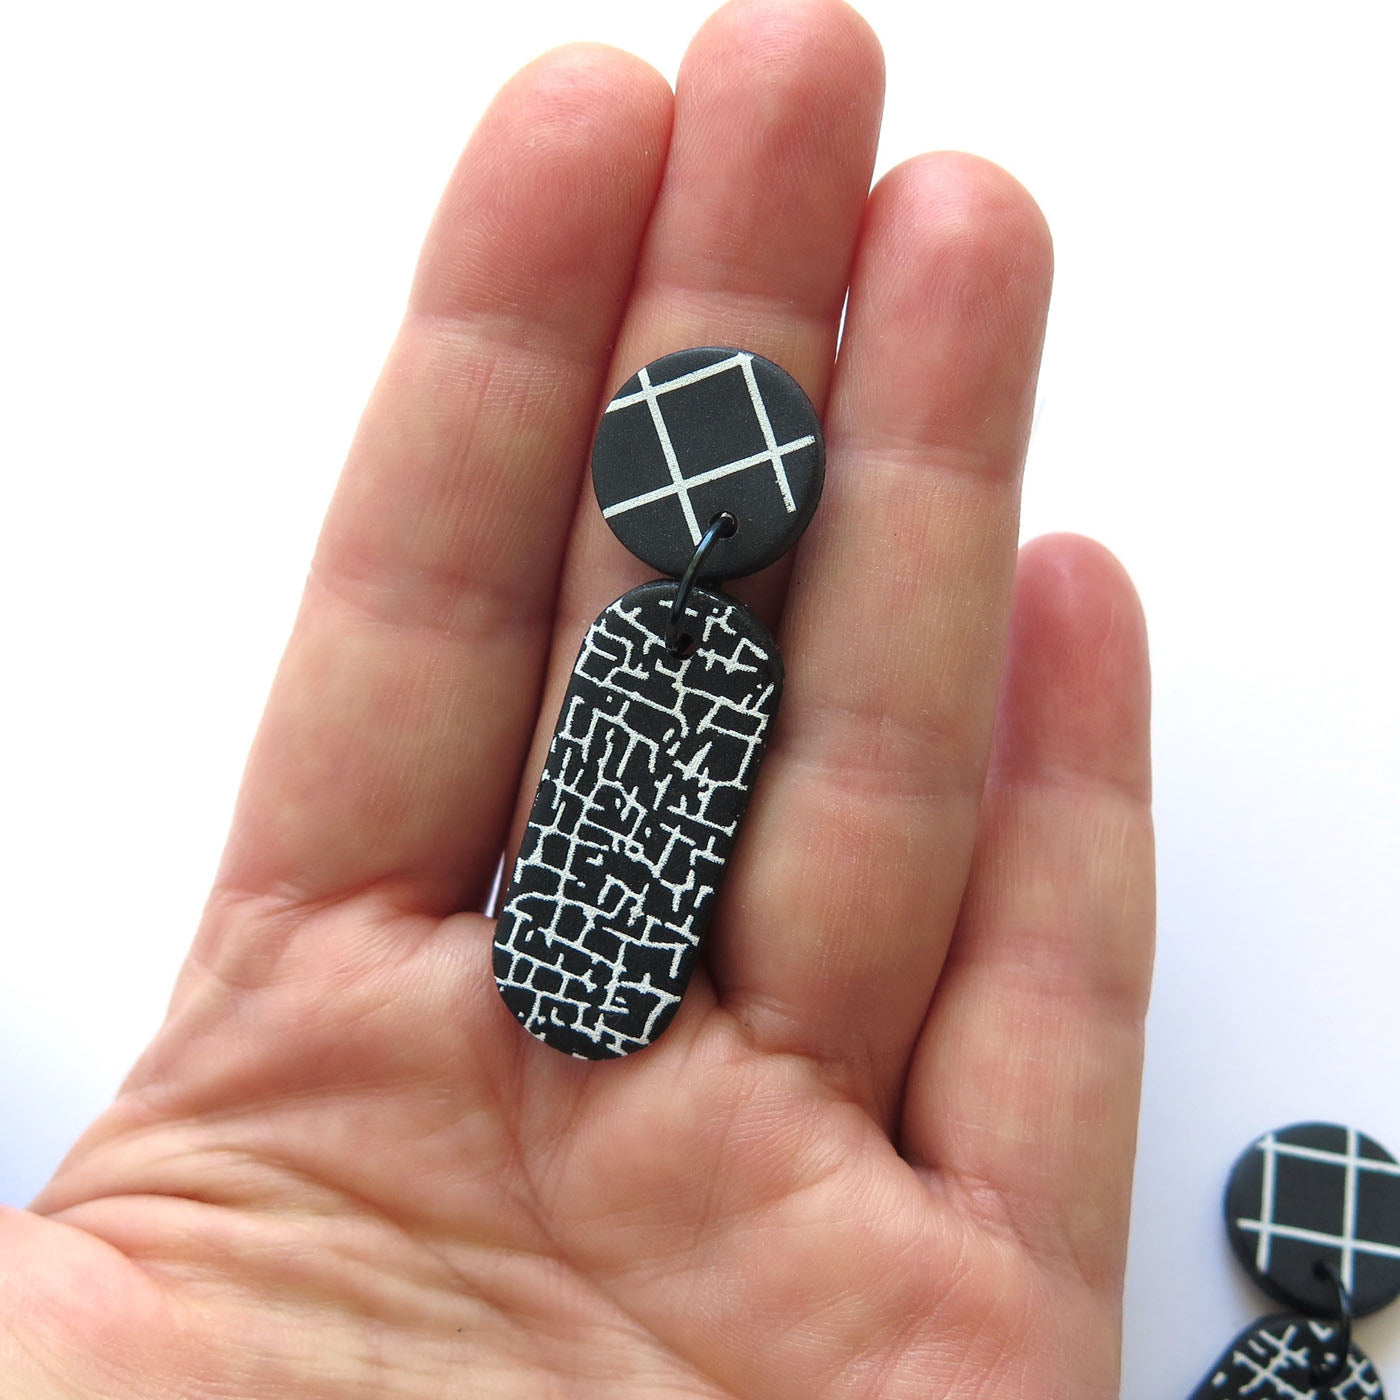 Crackle Black and White Statement Earrings - Tablet drop